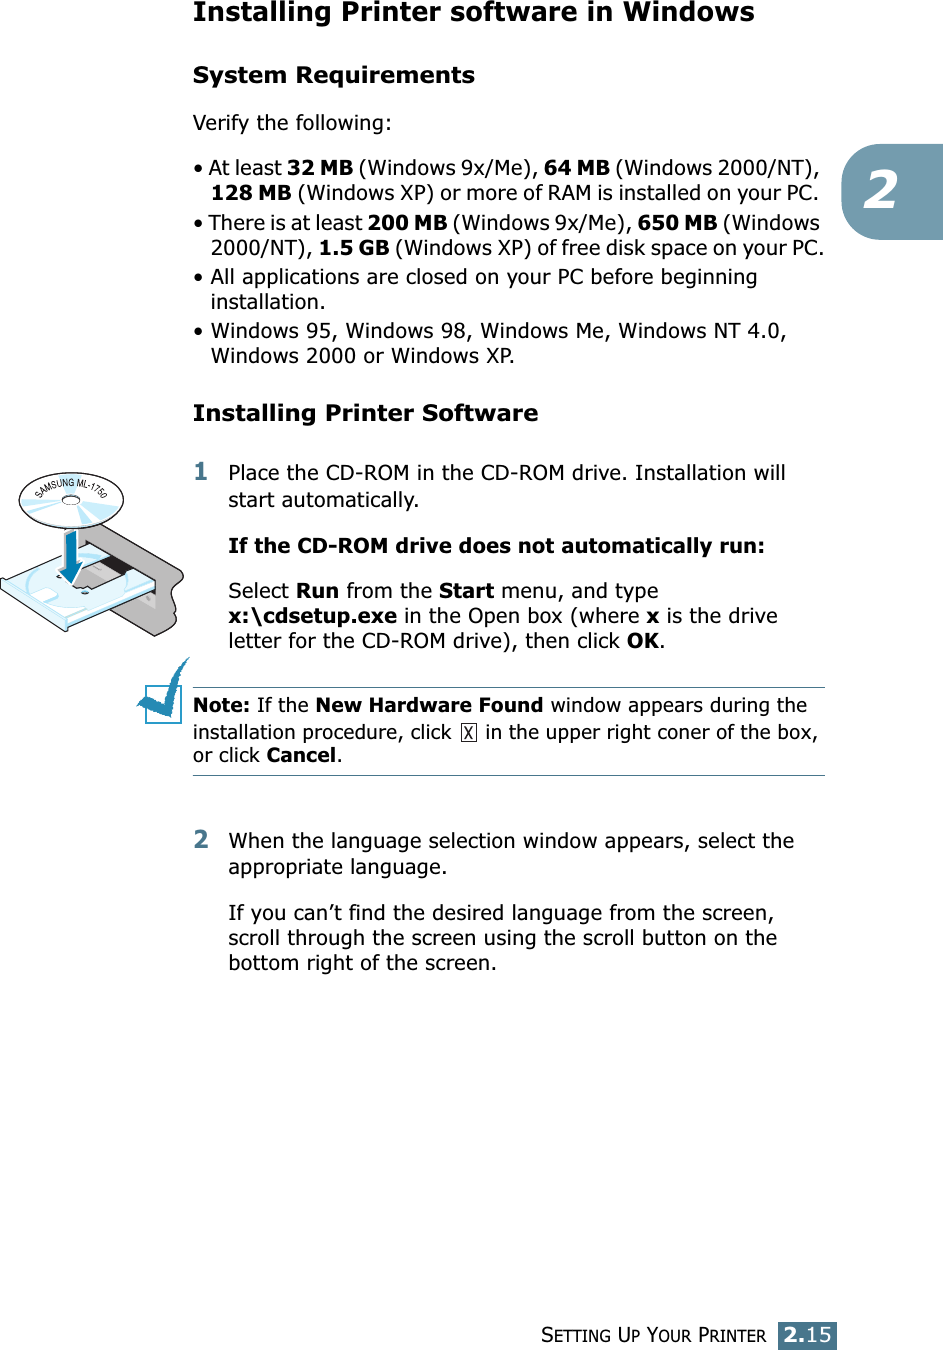 SETTING UP YOUR PRINTER2.152Installing Printer software in WindowsSystem RequirementsVerify the following:• At least 32 MB (Windows 9x/Me), 64 MB (Windows 2000/NT), 128 MB (Windows XP) or more of RAM is installed on your PC. • There is at least 200 MB (Windows 9x/Me), 650 MB (Windows 2000/NT), 1.5 GB (Windows XP) of free disk space on your PC.• All applications are closed on your PC before beginning installation. • Windows 95, Windows 98, Windows Me, Windows NT 4.0, Windows 2000 or Windows XP.Installing Printer Software1Place the CD-ROM in the CD-ROM drive. Installation will start automatically.If the CD-ROM drive does not automatically run:Select Run from the Start menu, and type x:\cdsetup.exe in the Open box (where x is the drive letter for the CD-ROM drive), then click OK.Note: If the New Hardware Found window appears during the installation procedure, click   in the upper right coner of the box, or click Cancel. 2When the language selection window appears, select the appropriate language. If you can’t find the desired language from the screen, scroll through the screen using the scroll button on the bottom right of the screen.